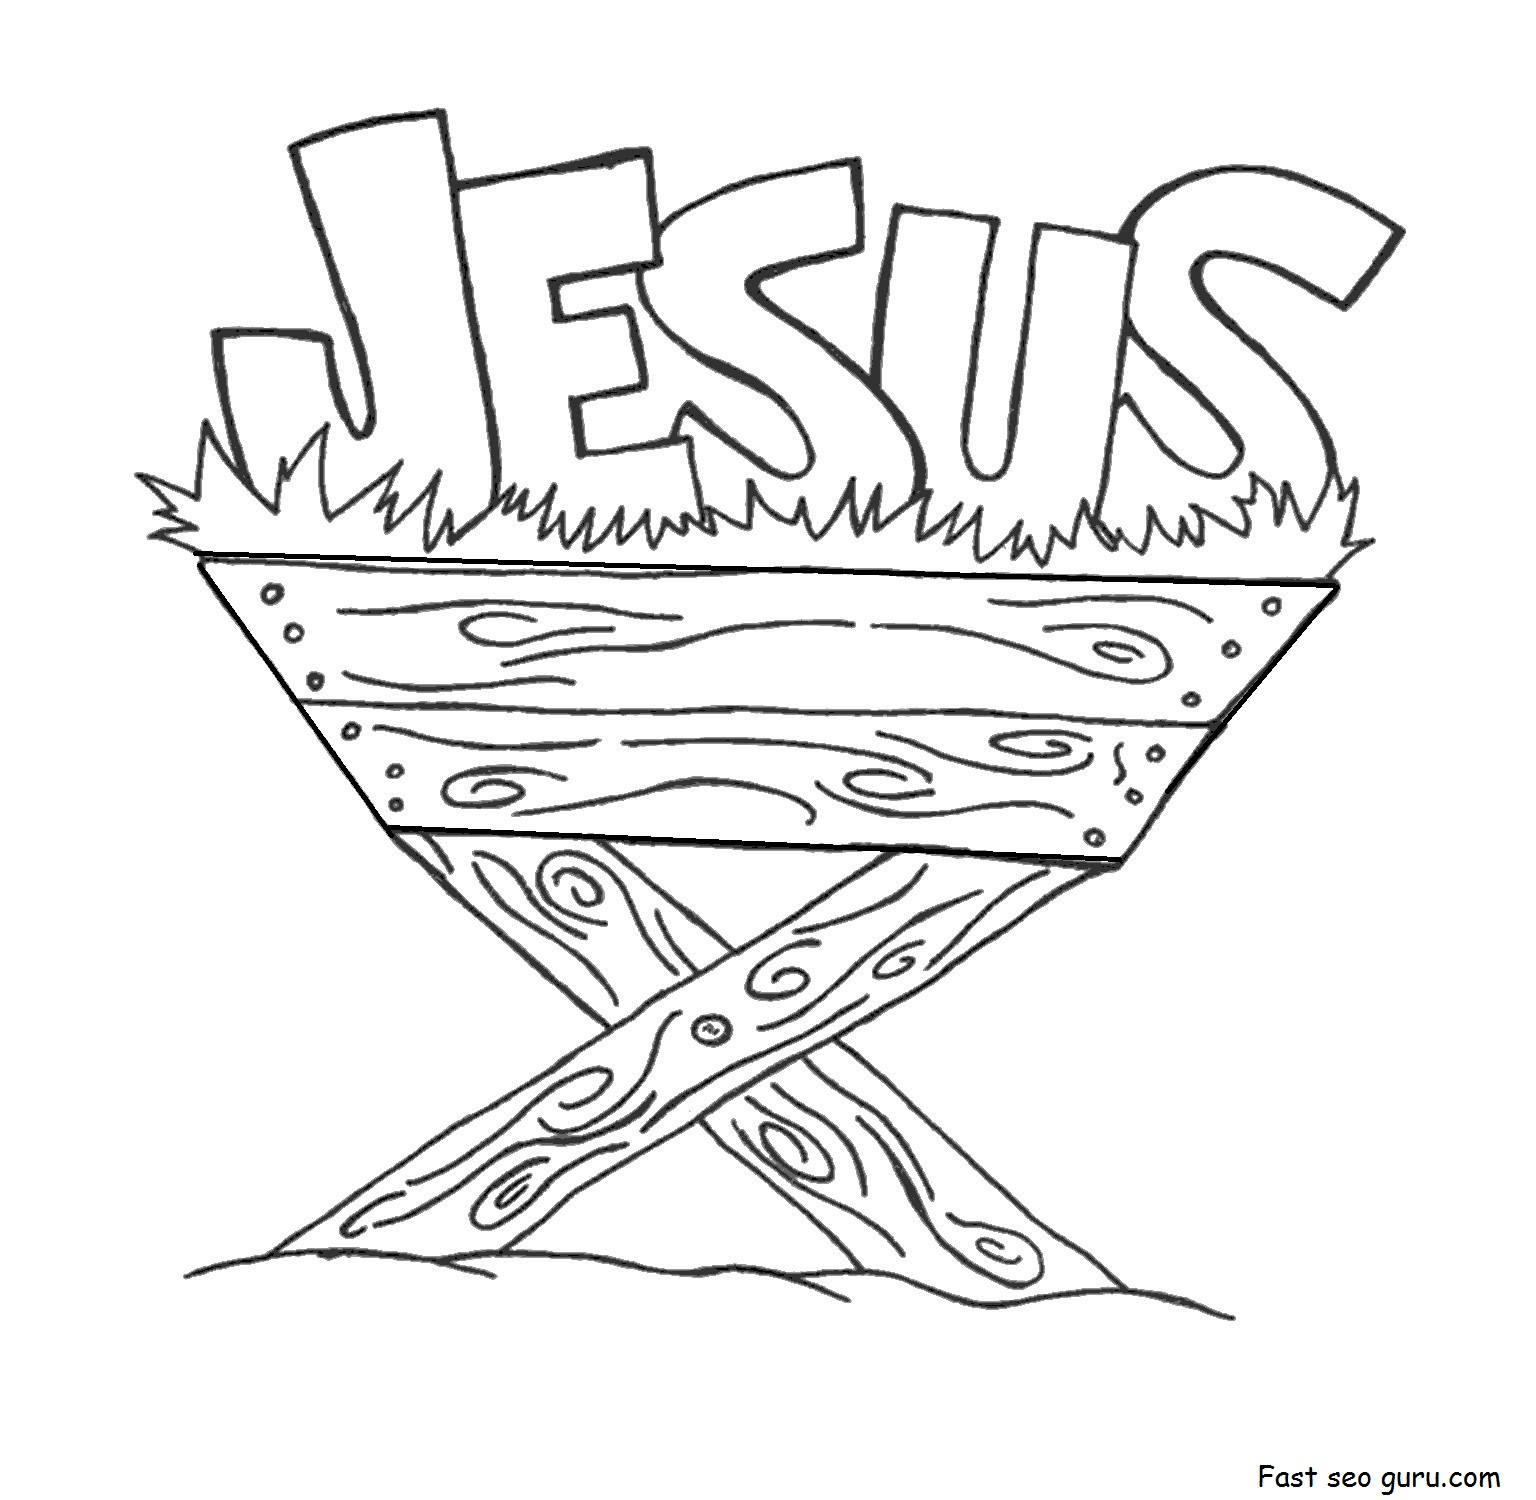 Print out jesus in the manger coloring pages